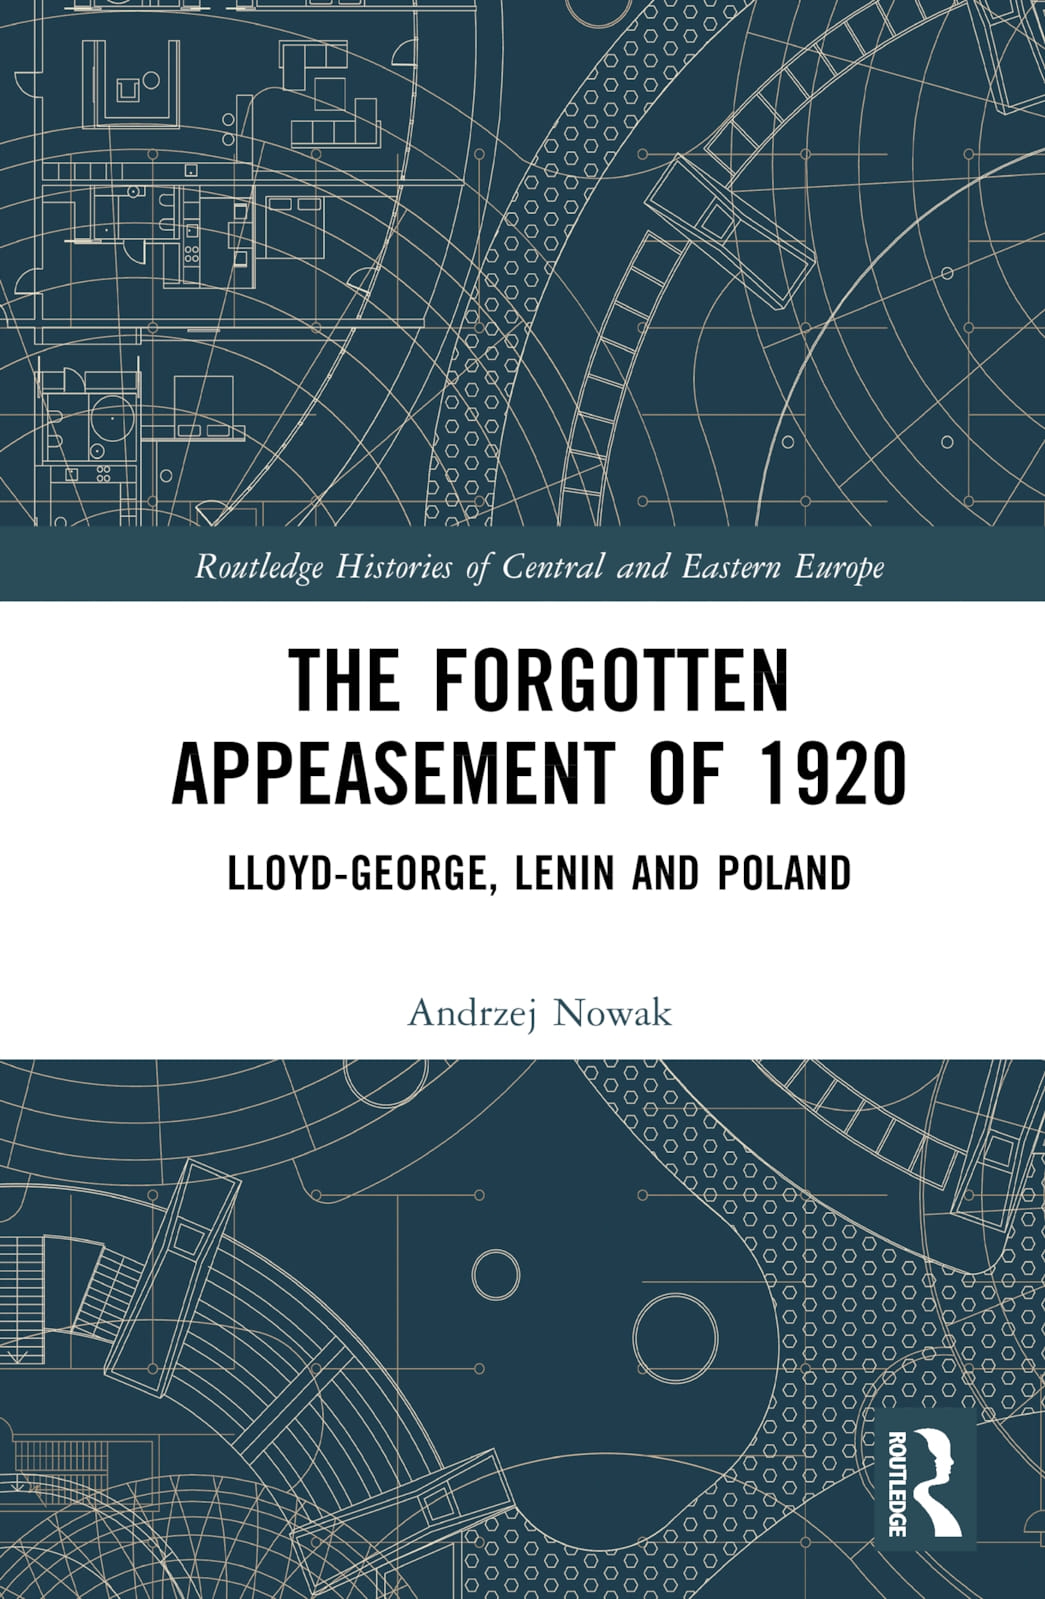 The Forgotten Appeasement of 1920: Lloyd-George, Lenin and Poland